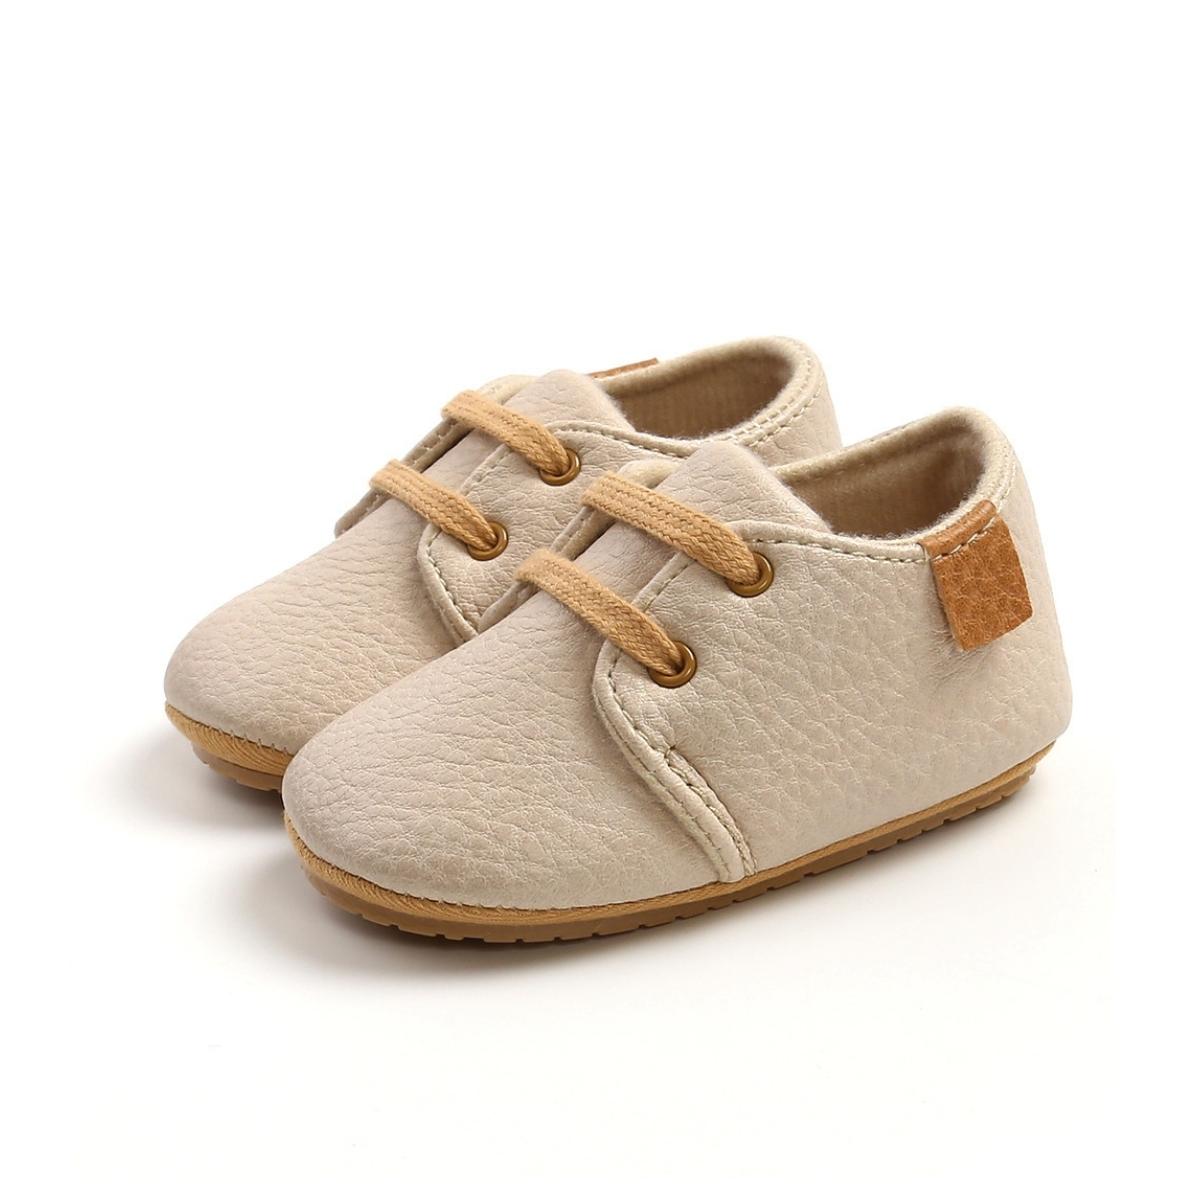 Stylish baby shoes for your little one – Little Charlie